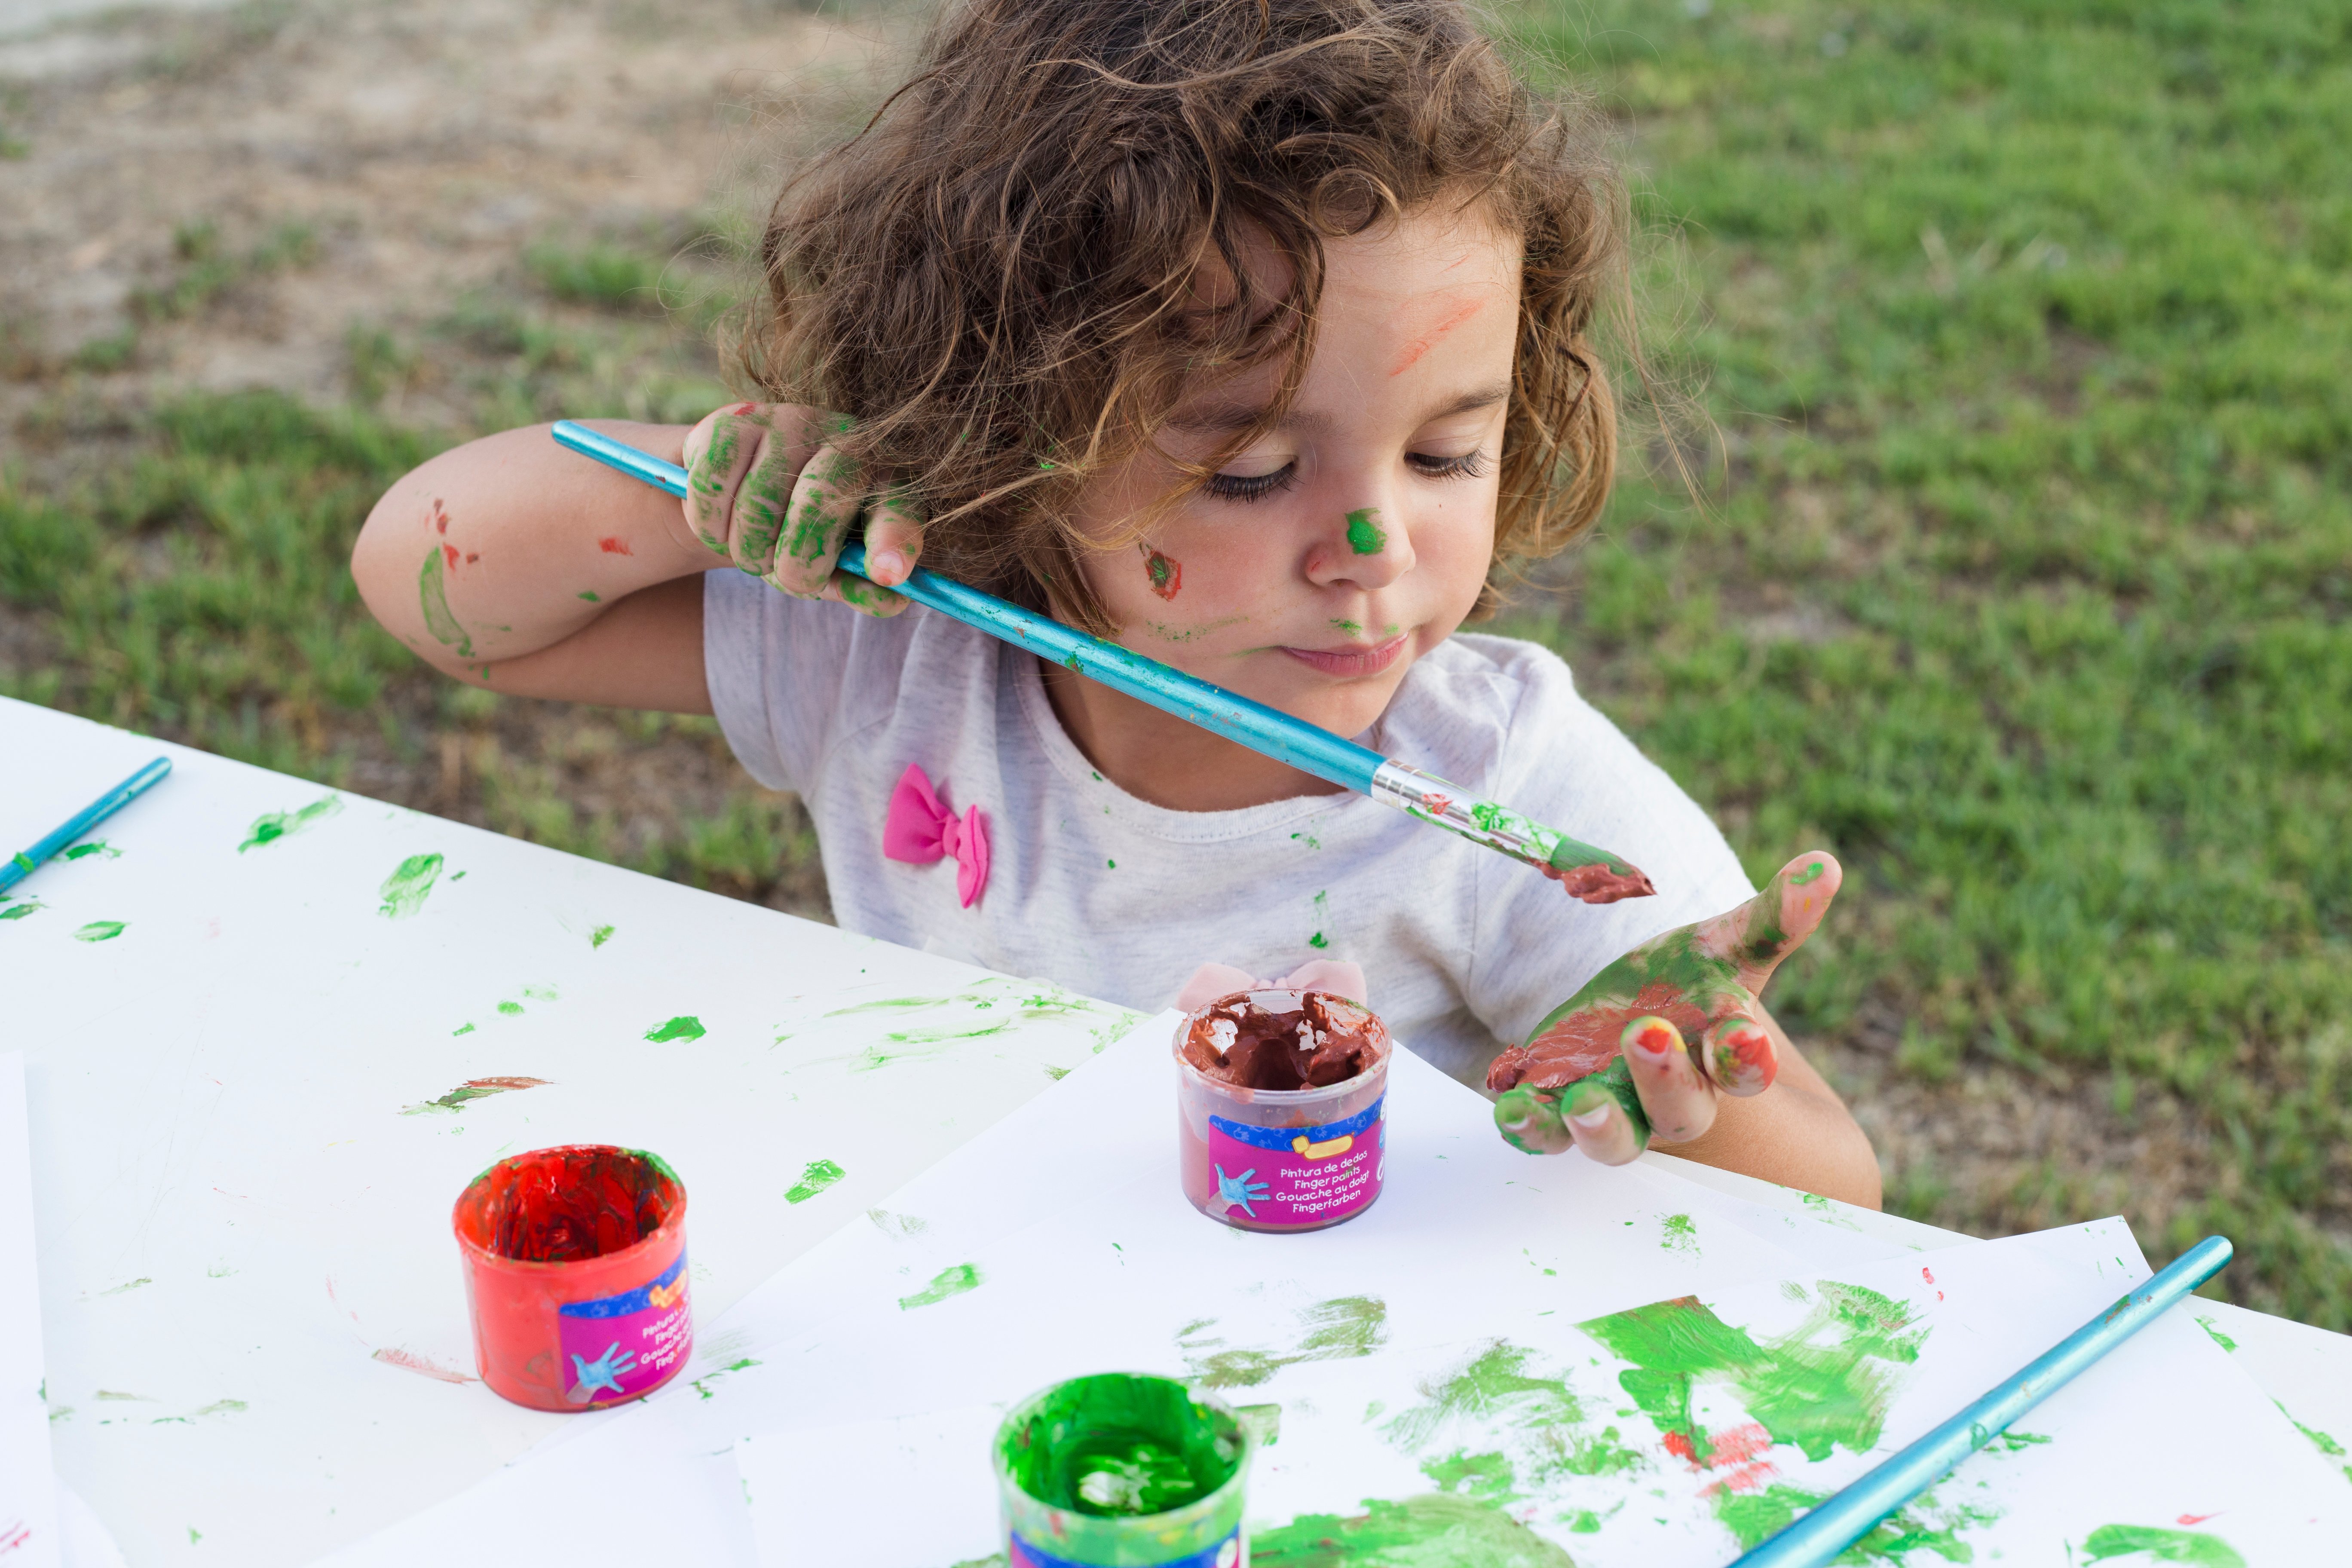 messy-girl-painting-canvas-park